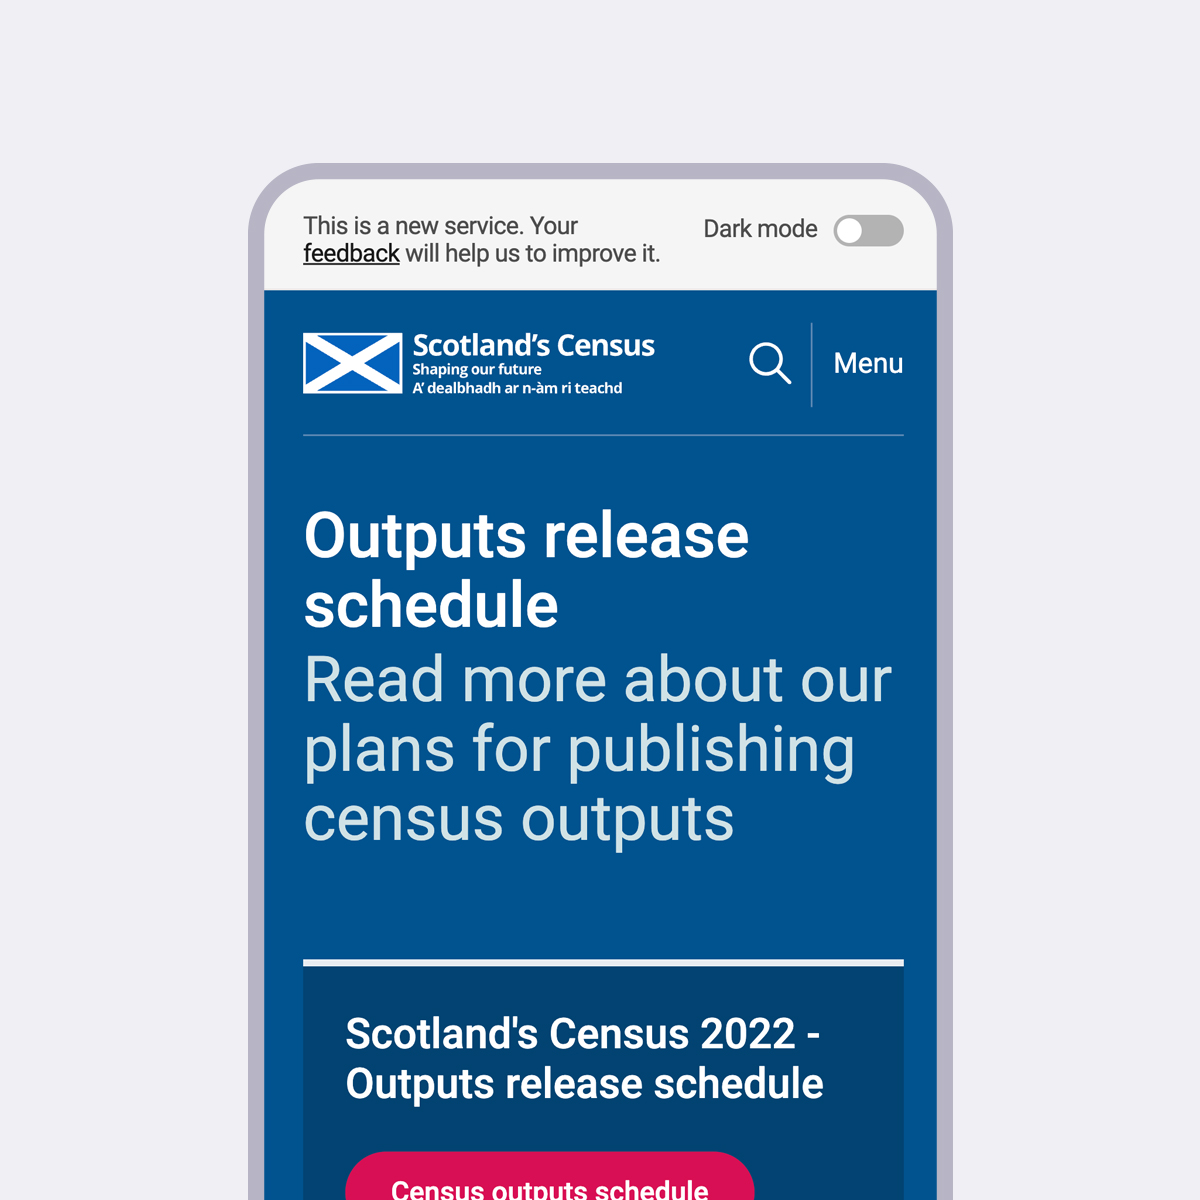 Scotland's Census website page in light mode